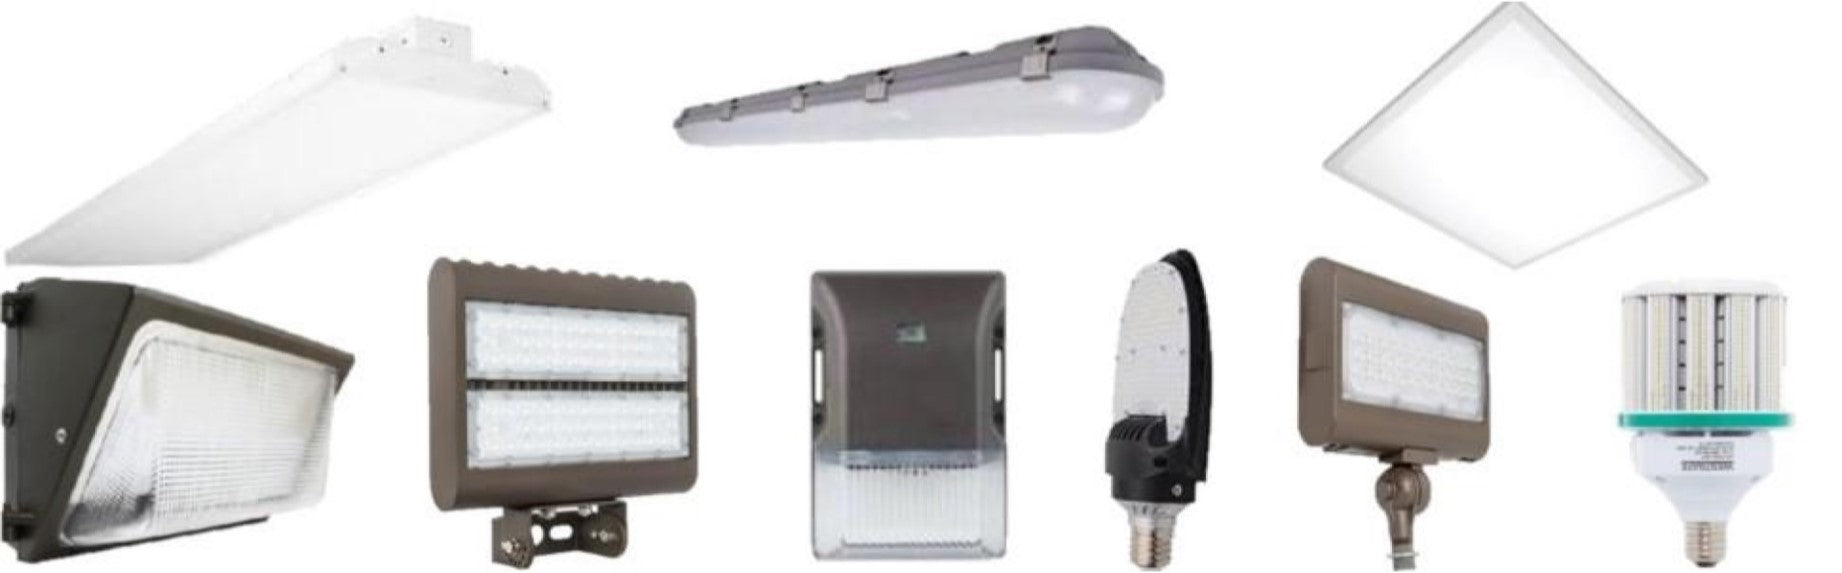 Various types of indoor and outdoor lights